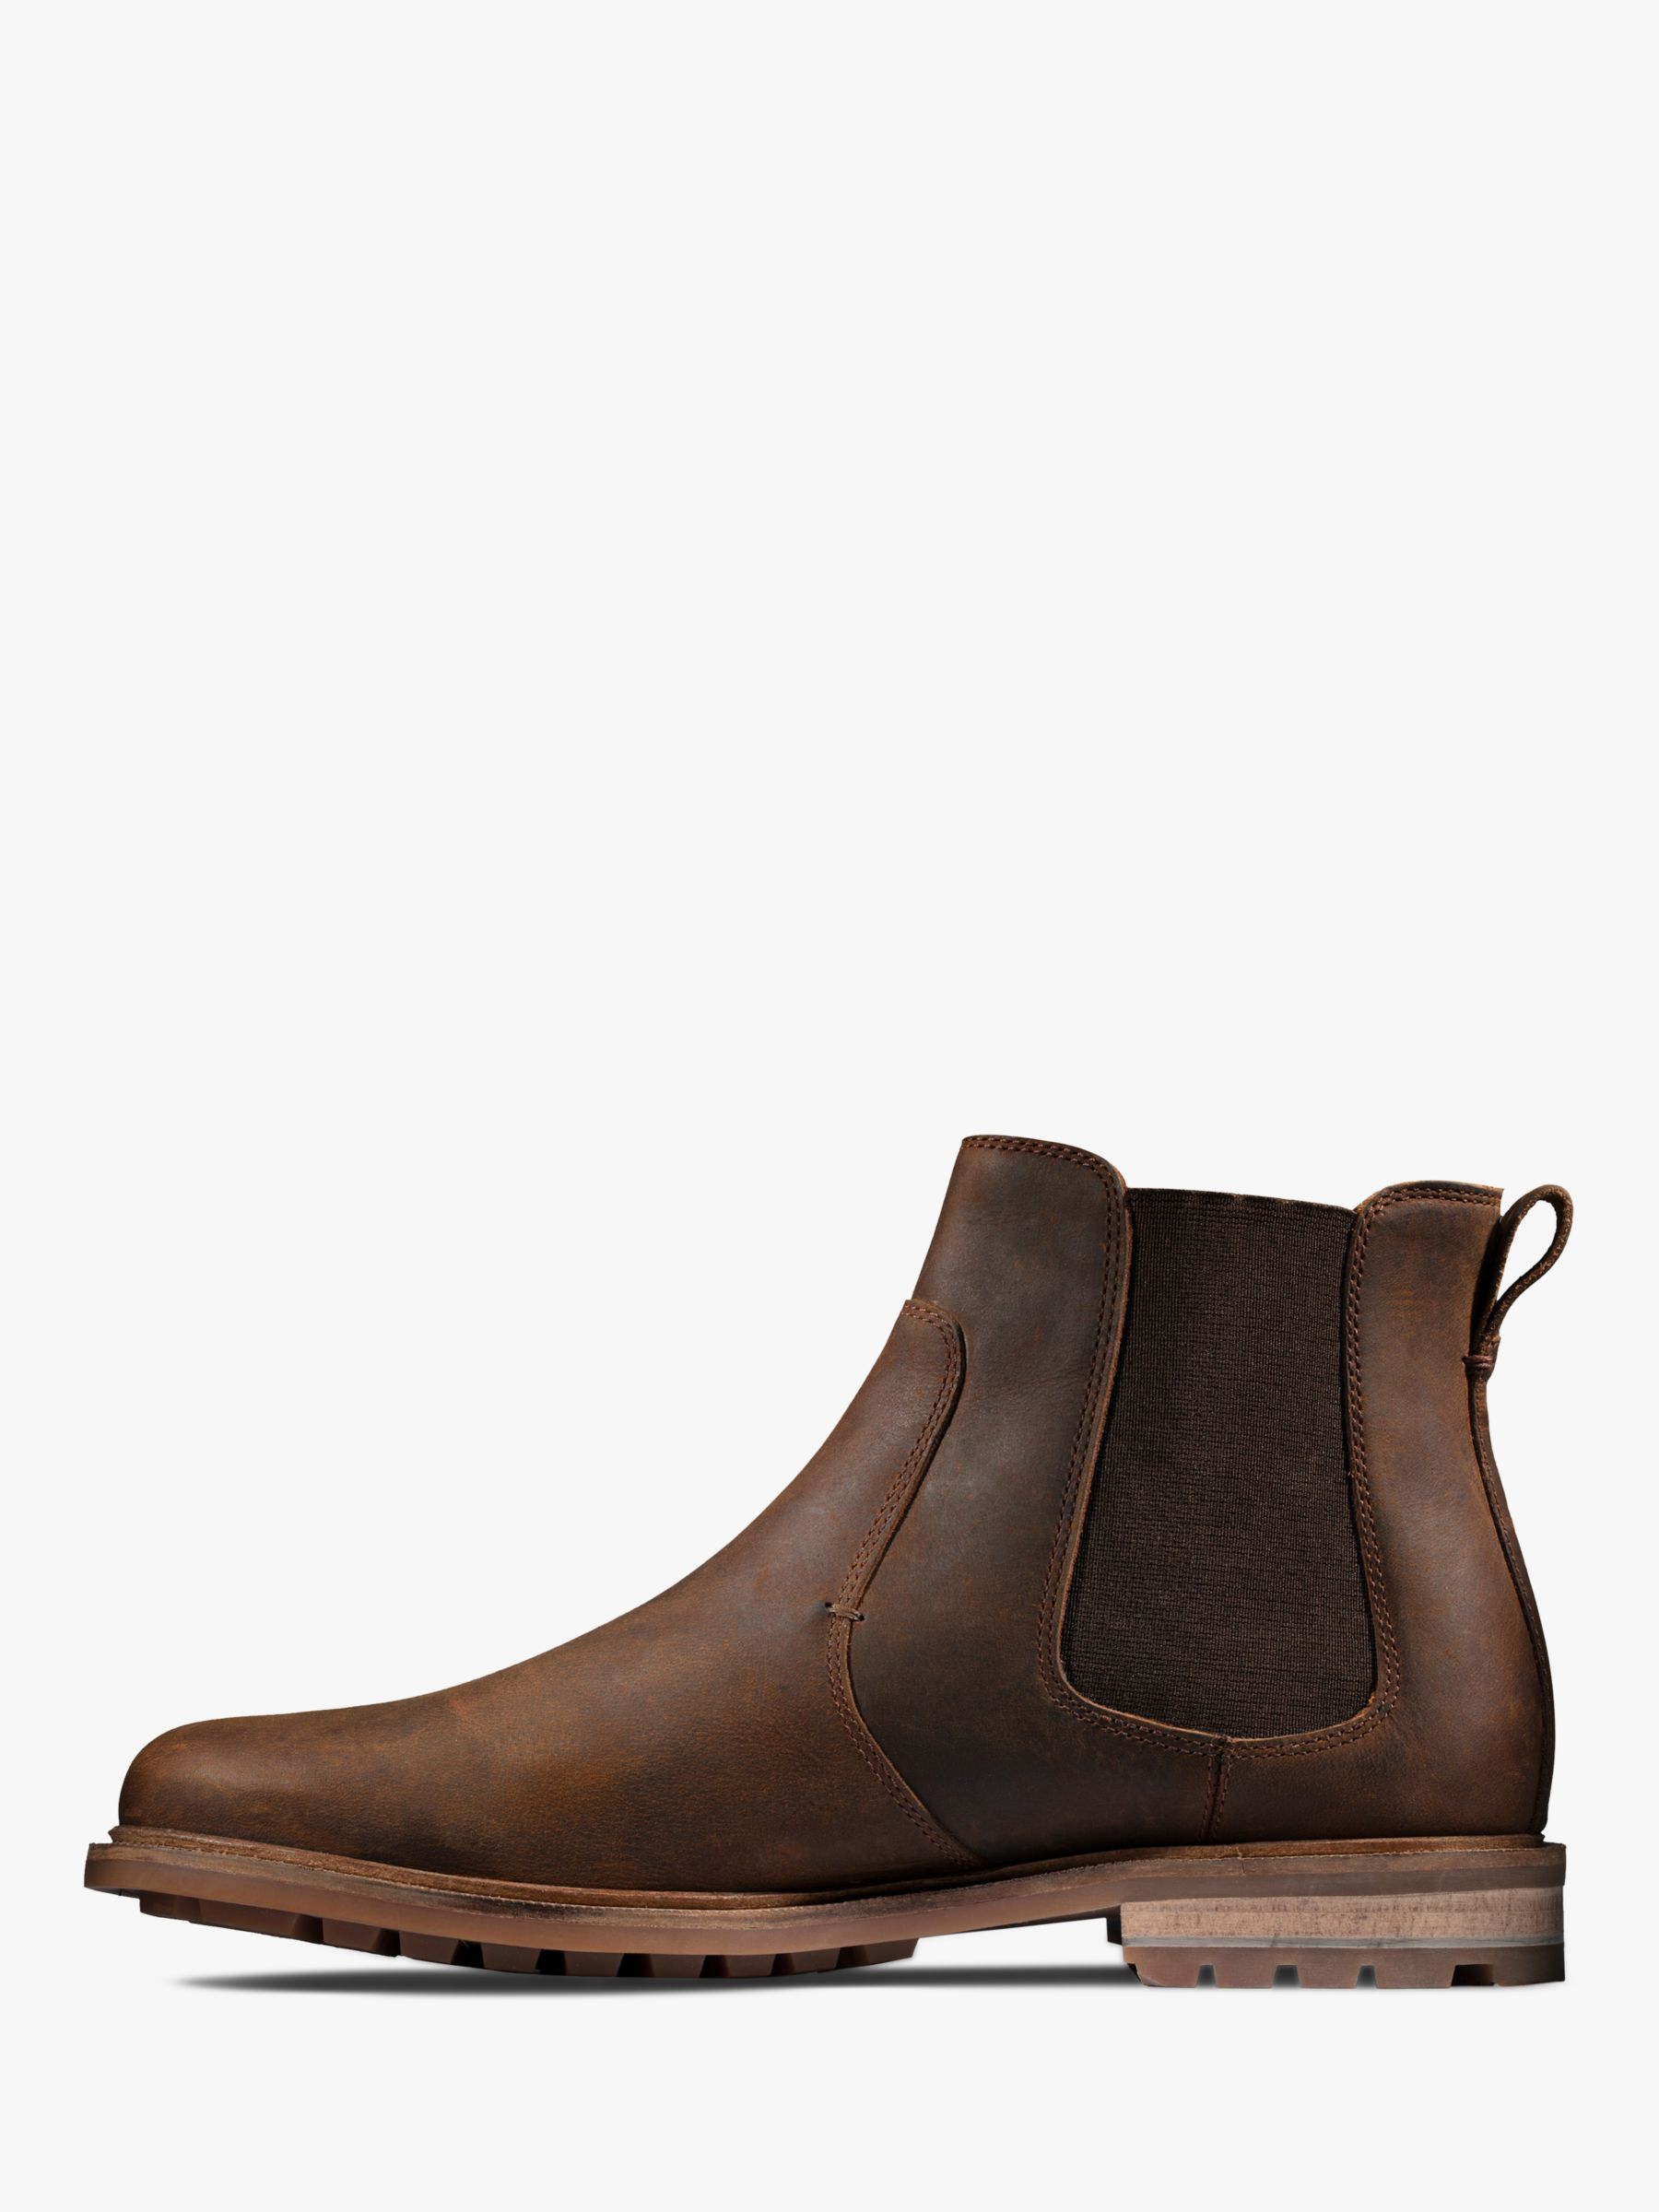 Clarks Foxwell Beeswax Leather Chelsea Boots, Brown at John Lewis ...